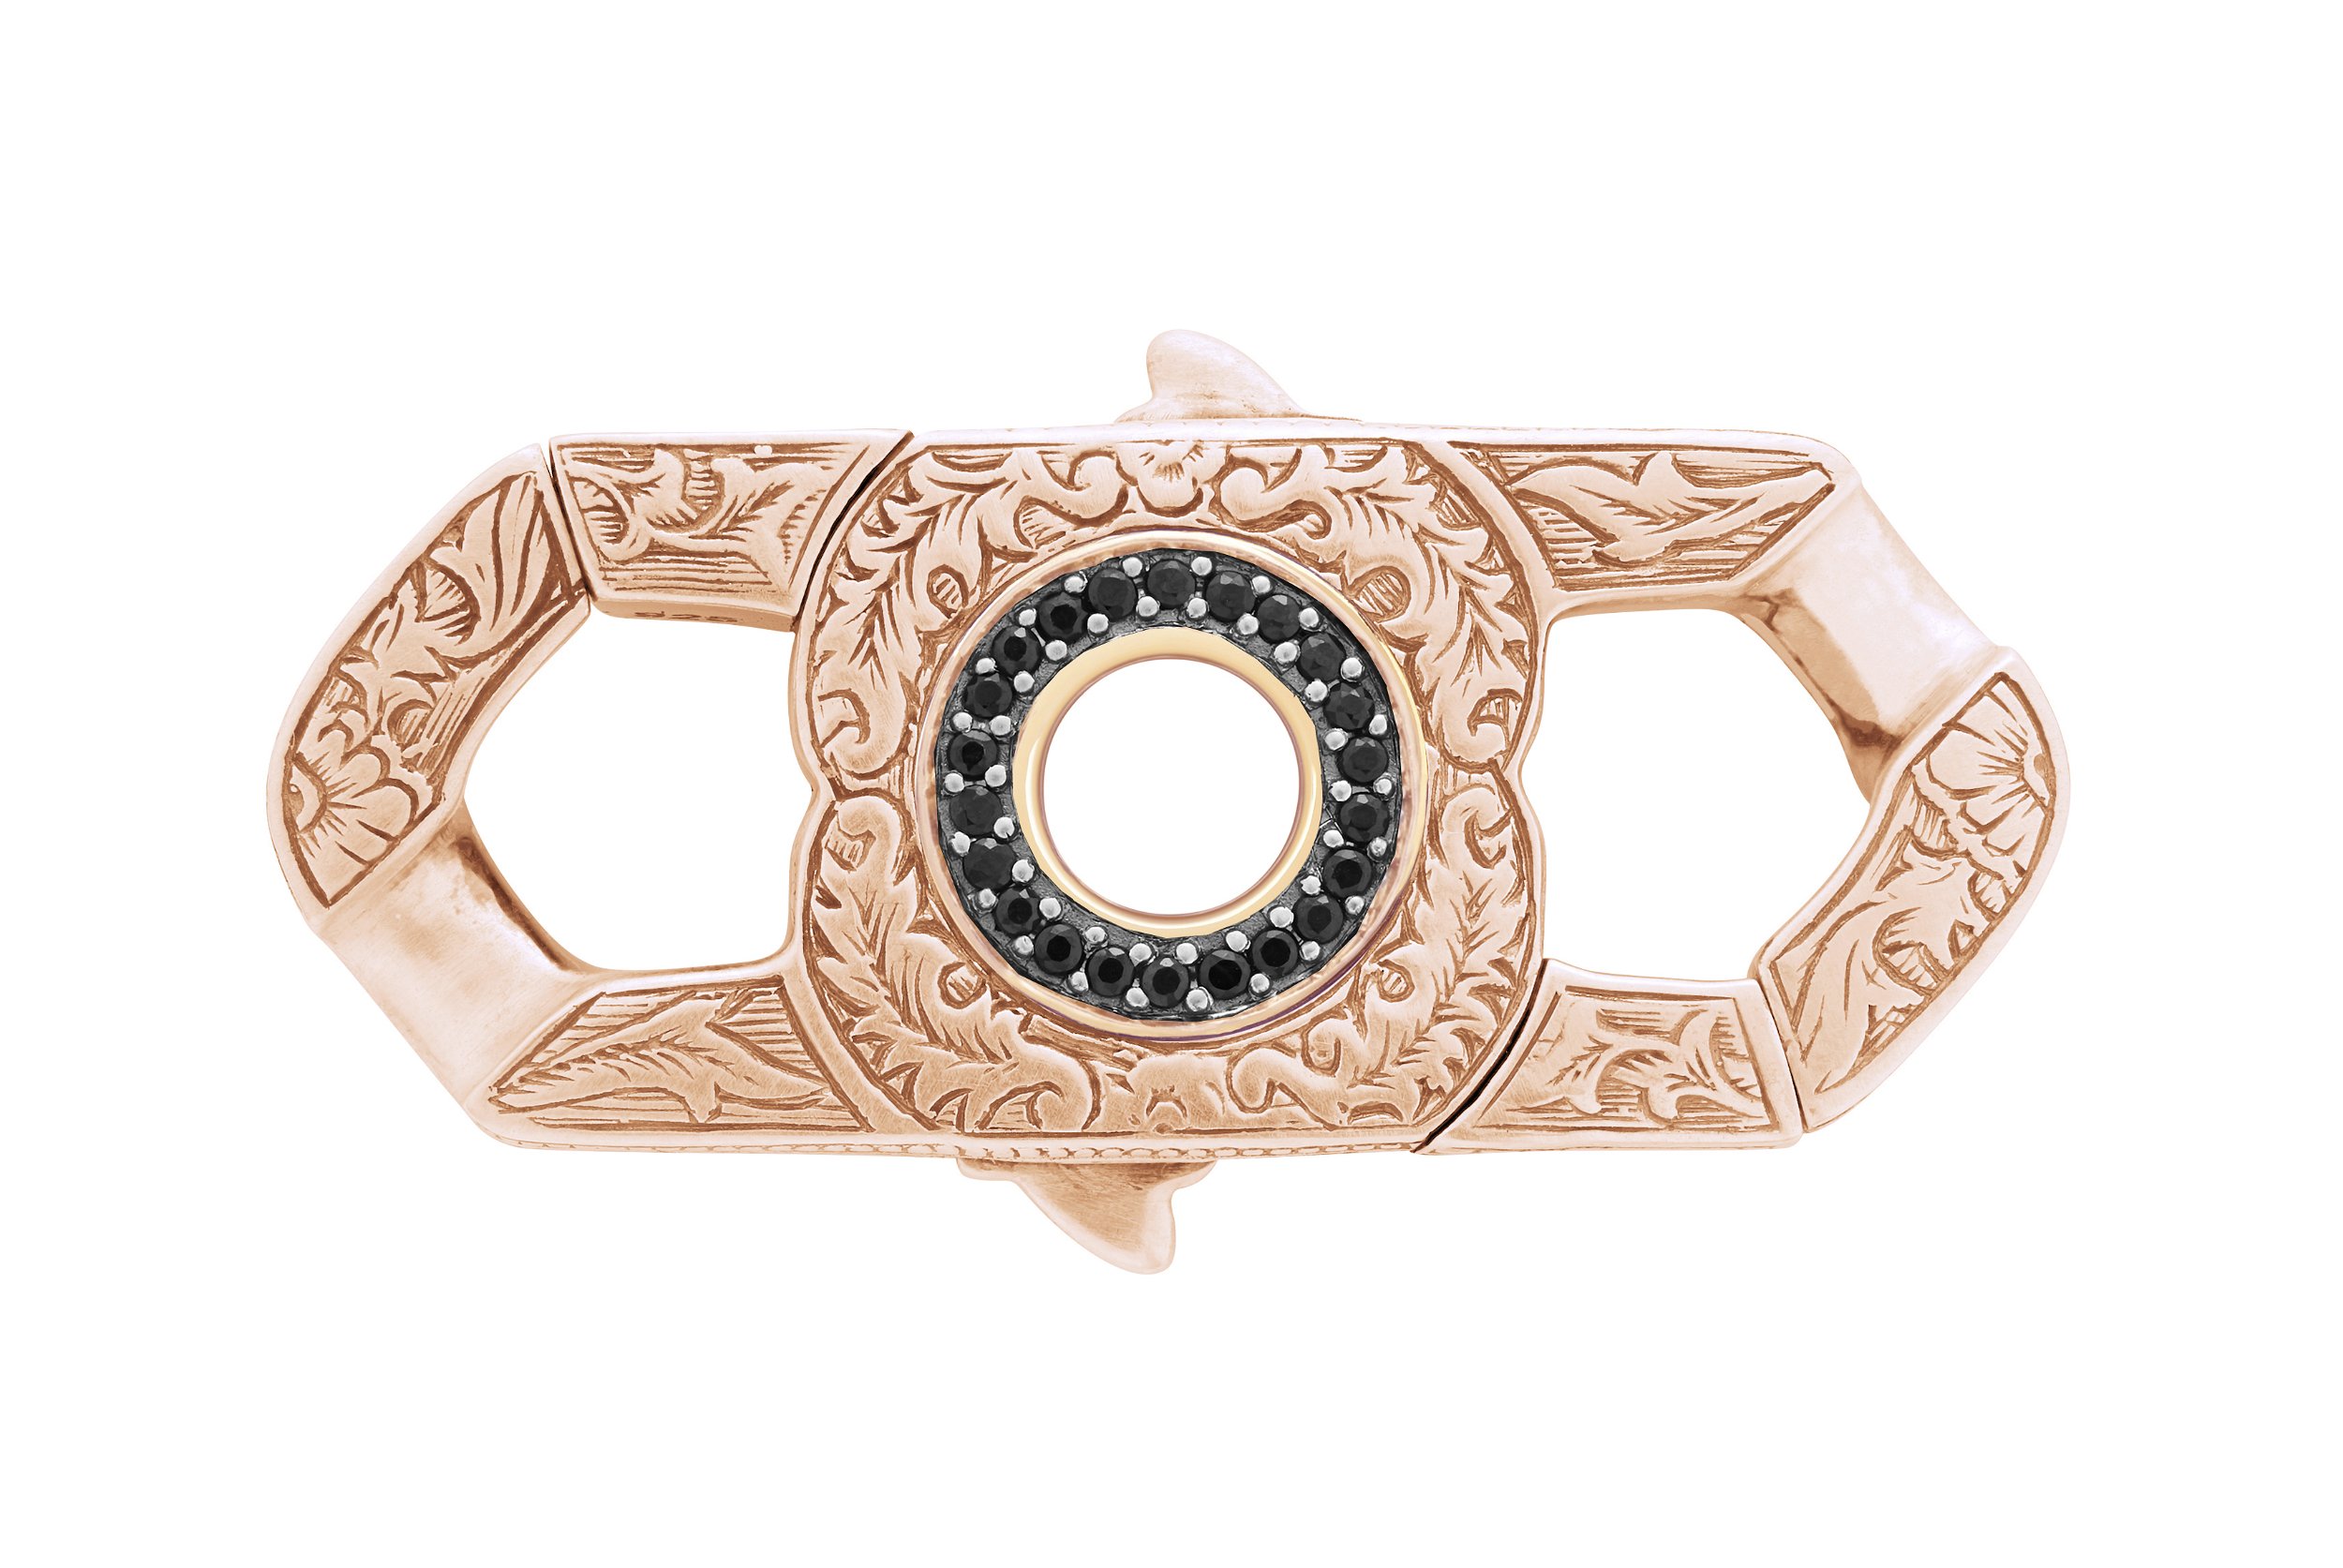 England Made Me Half Corona Bracelet Clasp with Black Diamonds in 18kt Rose Gold with Black Rhodium Over - 13mm